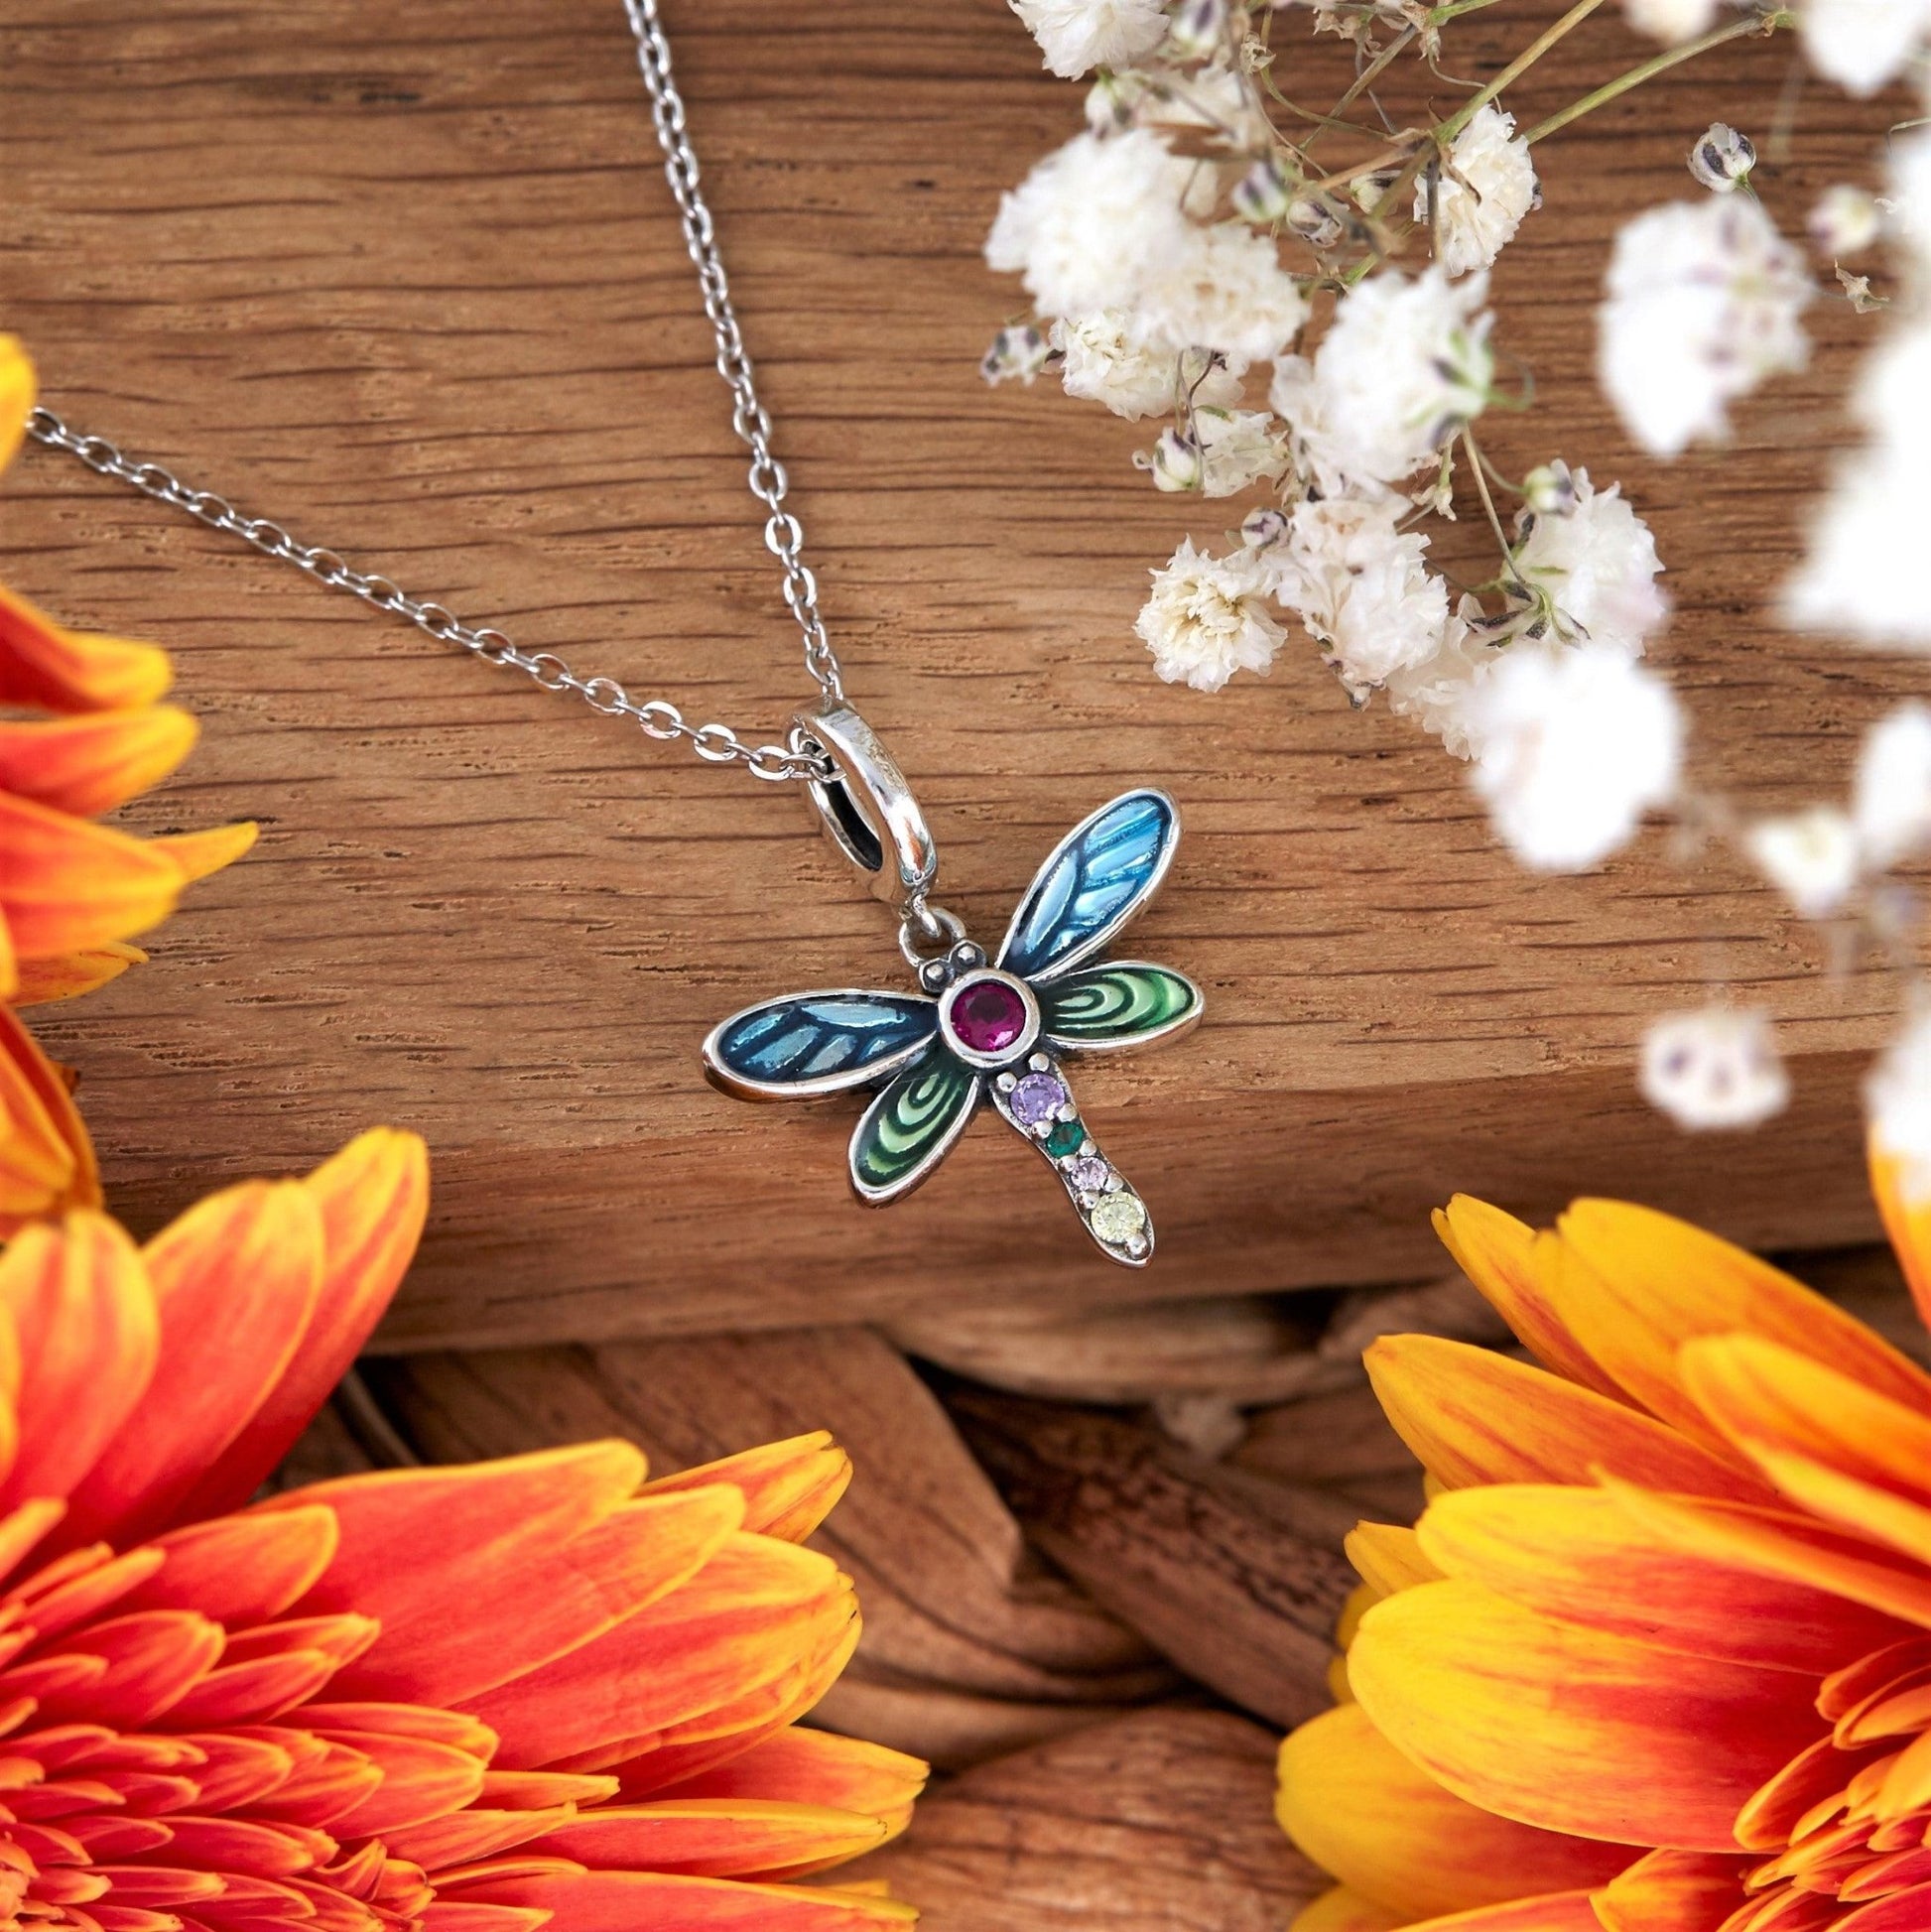 Dragonfly Charm - The Bee Charm